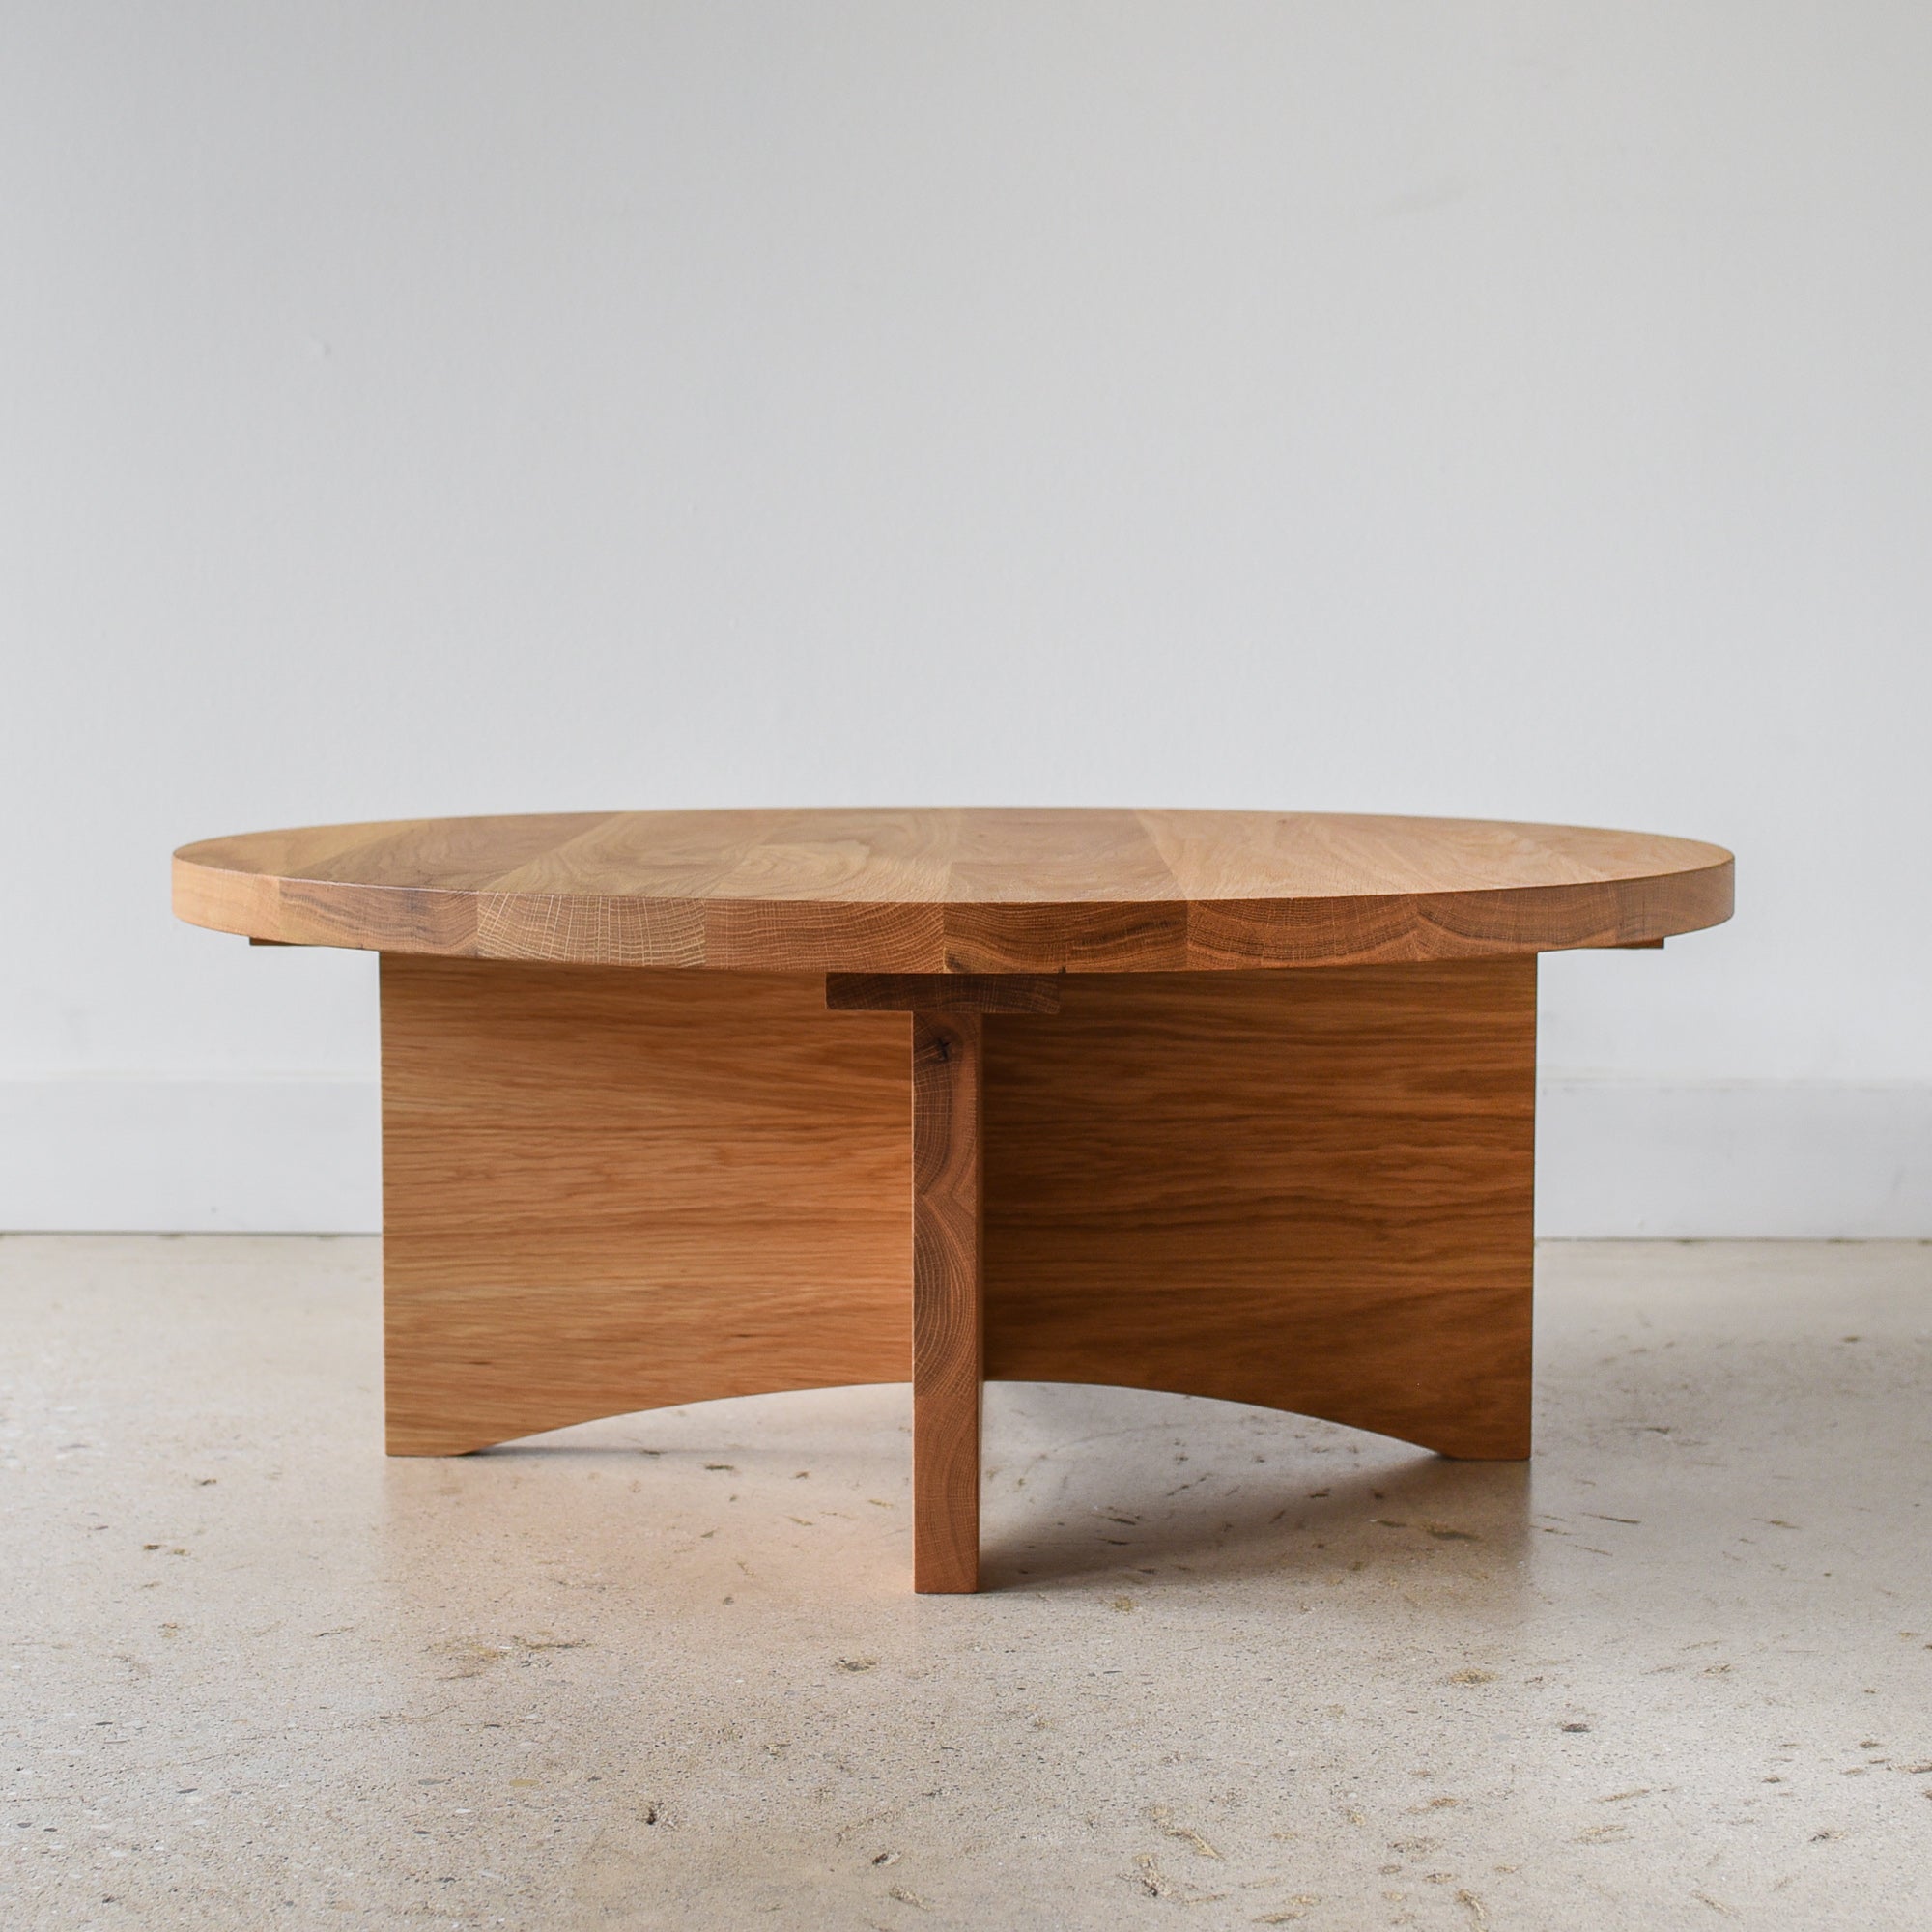 Sculptural Round Wood Coffee Table